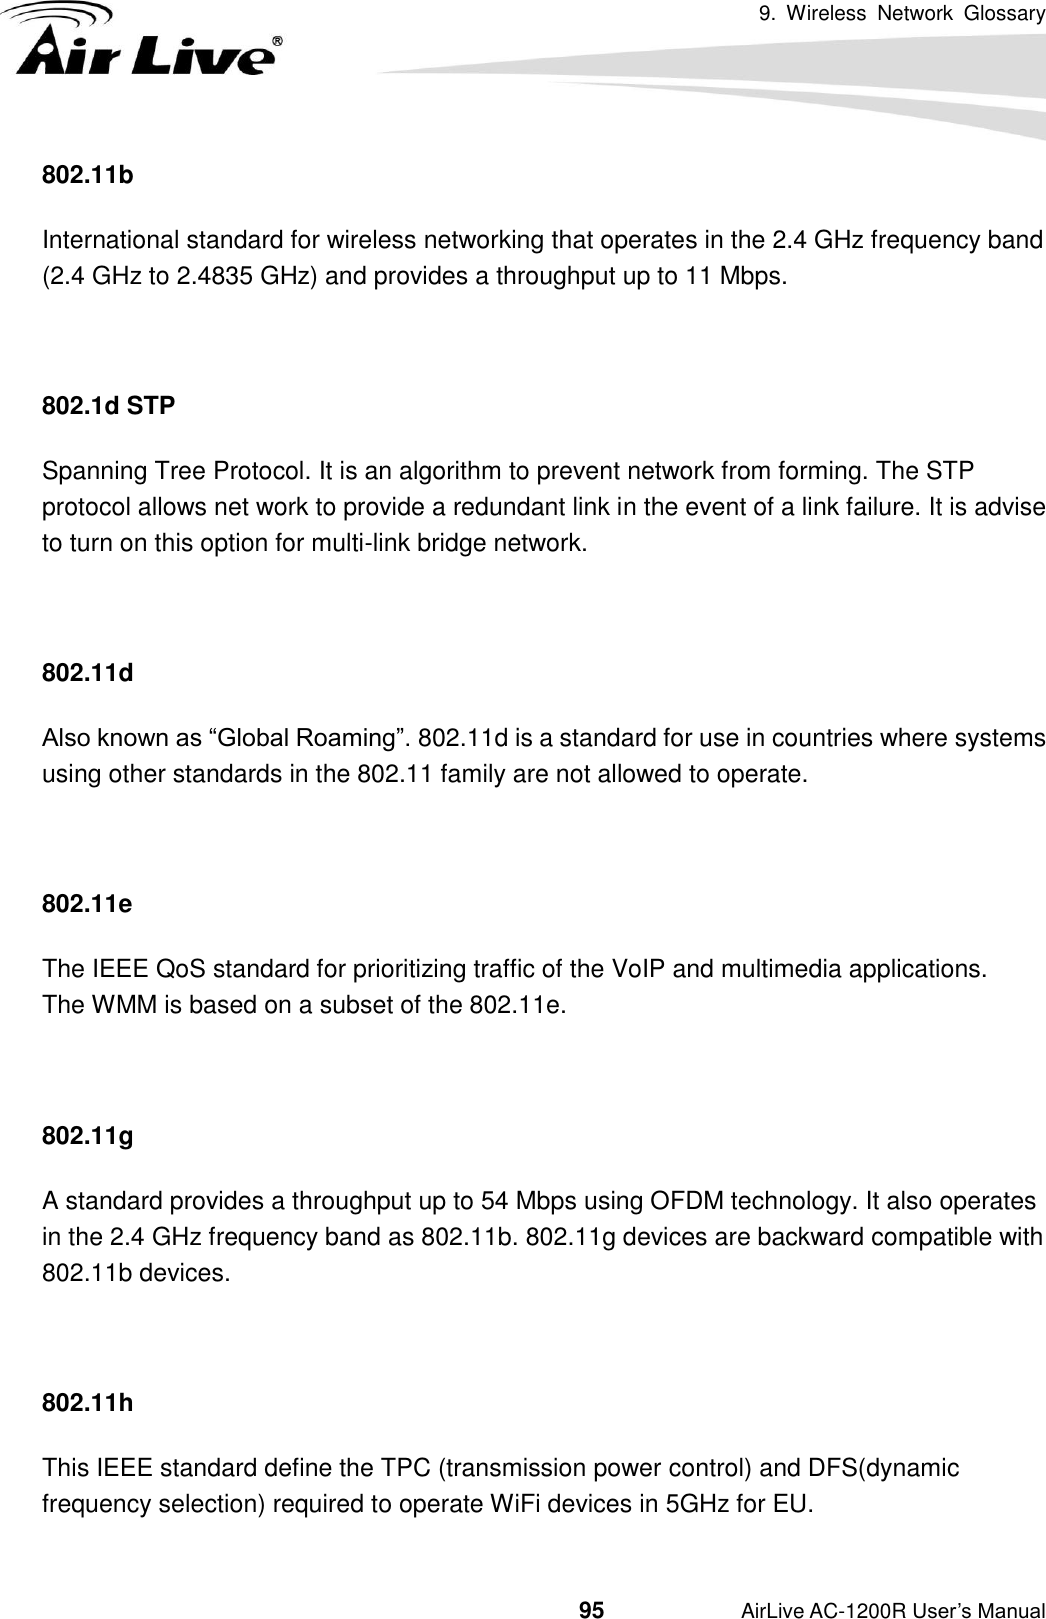 9.  Wireless  Network  Glossary                                          95           AirLive AC-1200R User’s Manual 802.11b International standard for wireless networking that operates in the 2.4 GHz frequency band (2.4 GHz to 2.4835 GHz) and provides a throughput up to 11 Mbps.    802.1d STP Spanning Tree Protocol. It is an algorithm to prevent network from forming. The STP protocol allows net work to provide a redundant link in the event of a link failure. It is advise to turn on this option for multi-link bridge network.  802.11d Also known as “Global Roaming”. 802.11d is a standard for use in countries where systems using other standards in the 802.11 family are not allowed to operate.  802.11e The IEEE QoS standard for prioritizing traffic of the VoIP and multimedia applications.   The WMM is based on a subset of the 802.11e.  802.11g A standard provides a throughput up to 54 Mbps using OFDM technology. It also operates in the 2.4 GHz frequency band as 802.11b. 802.11g devices are backward compatible with 802.11b devices.  802.11h This IEEE standard define the TPC (transmission power control) and DFS(dynamic frequency selection) required to operate WiFi devices in 5GHz for EU. 